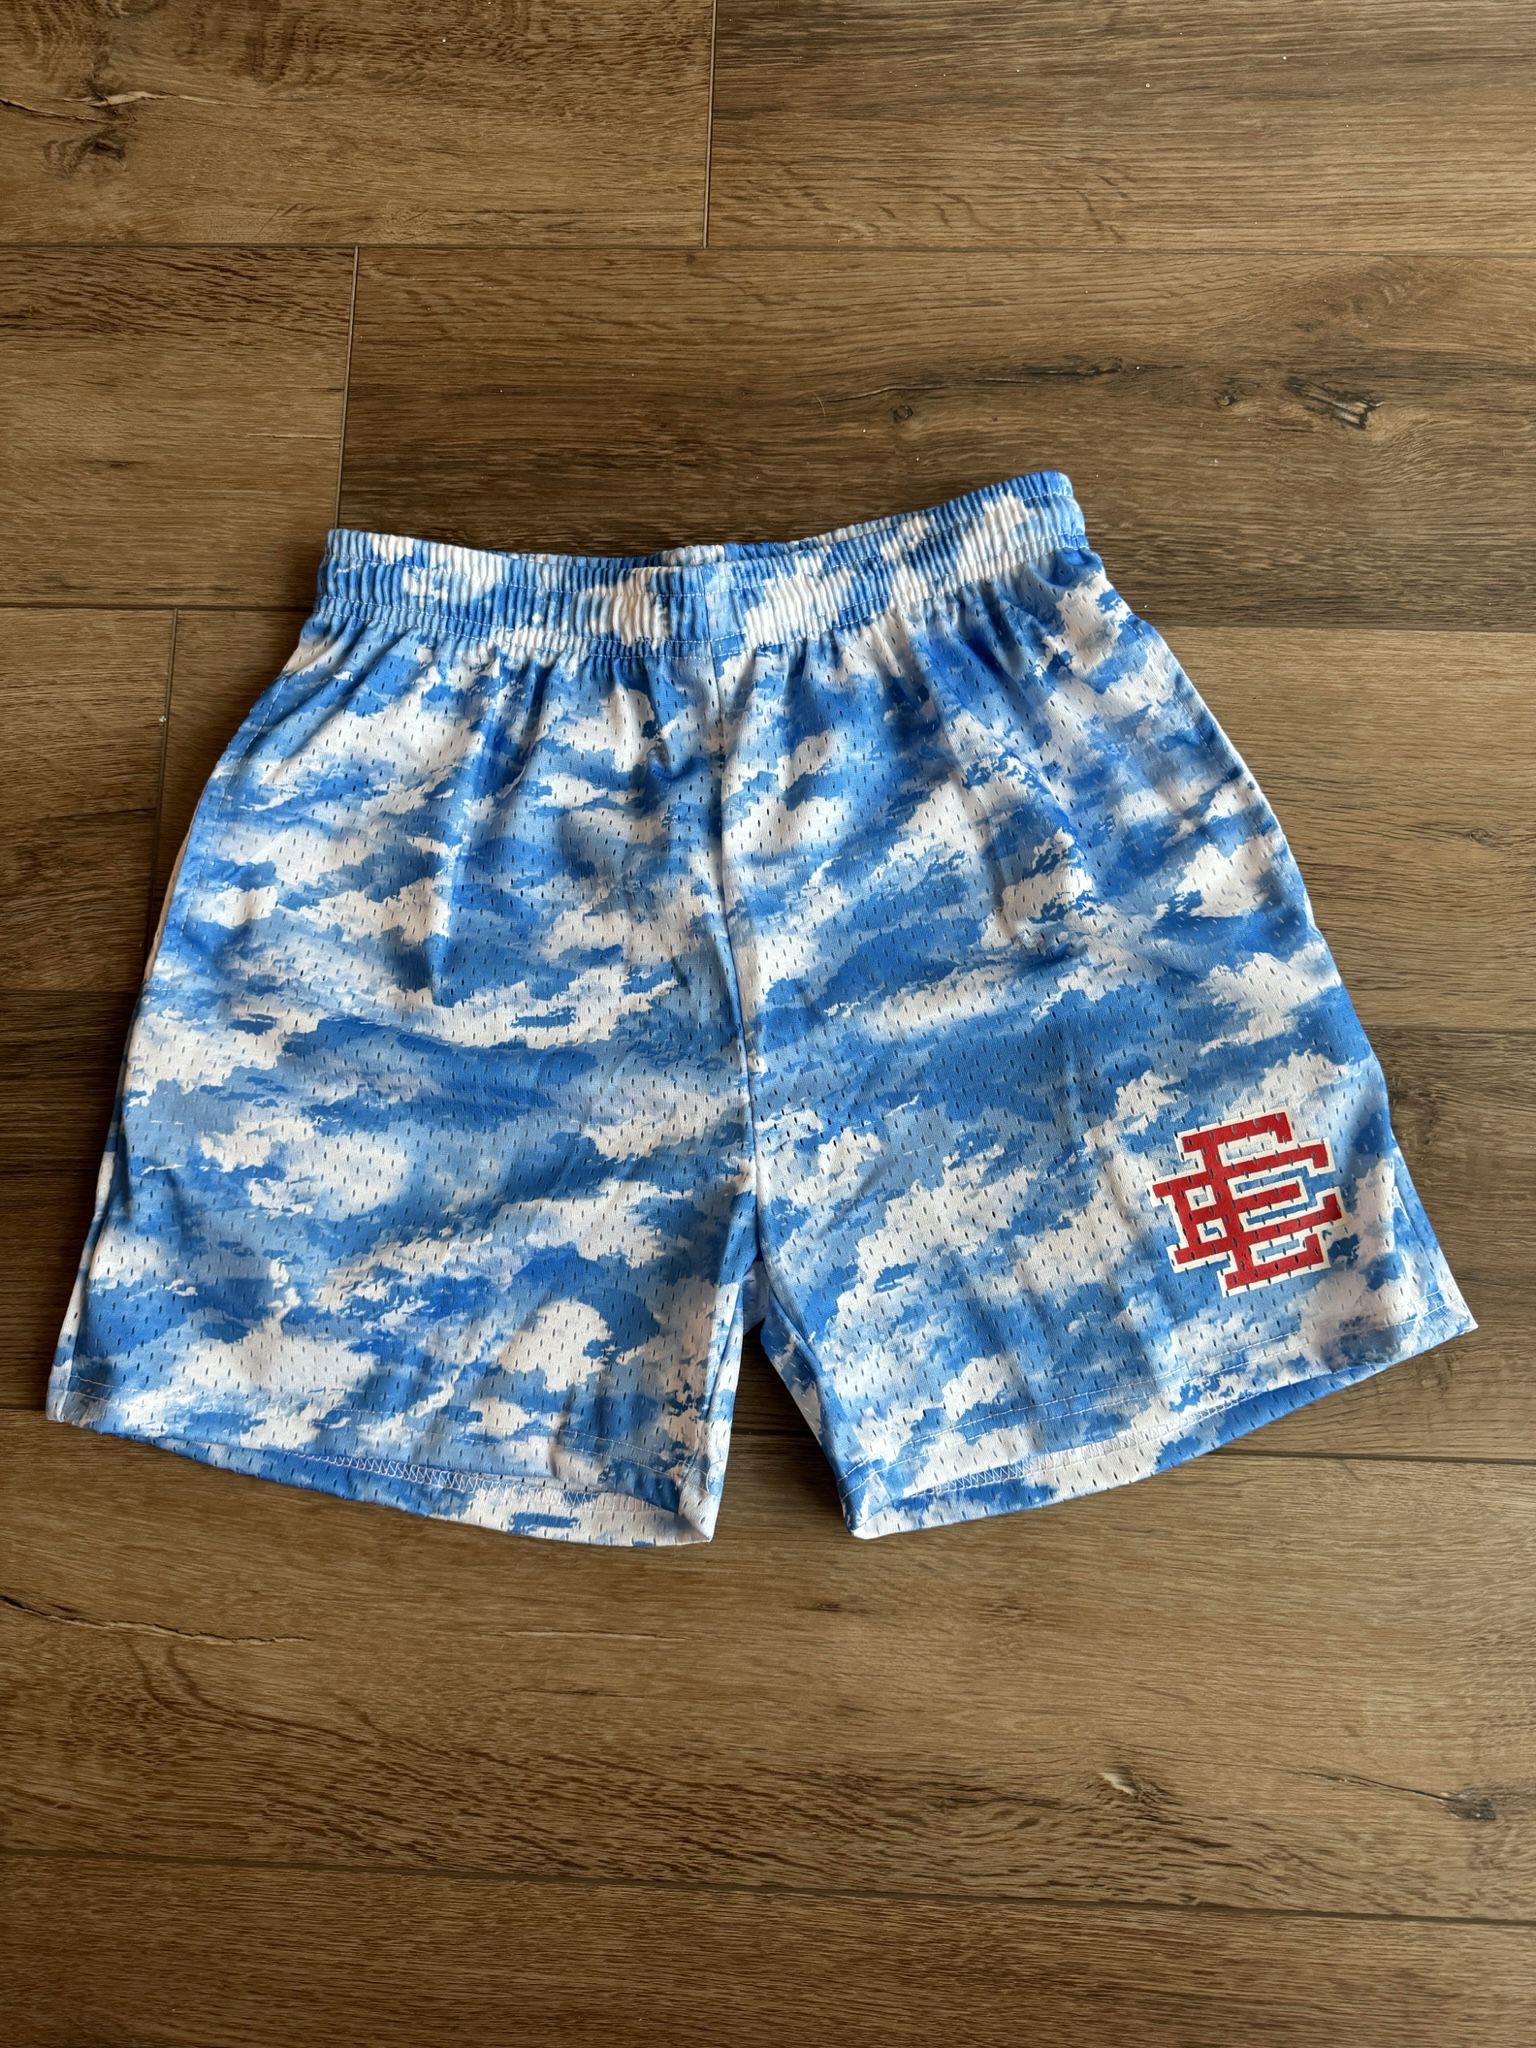 Eric Emanuel Shorts, Medium / Large Available (check out my page🔥) 